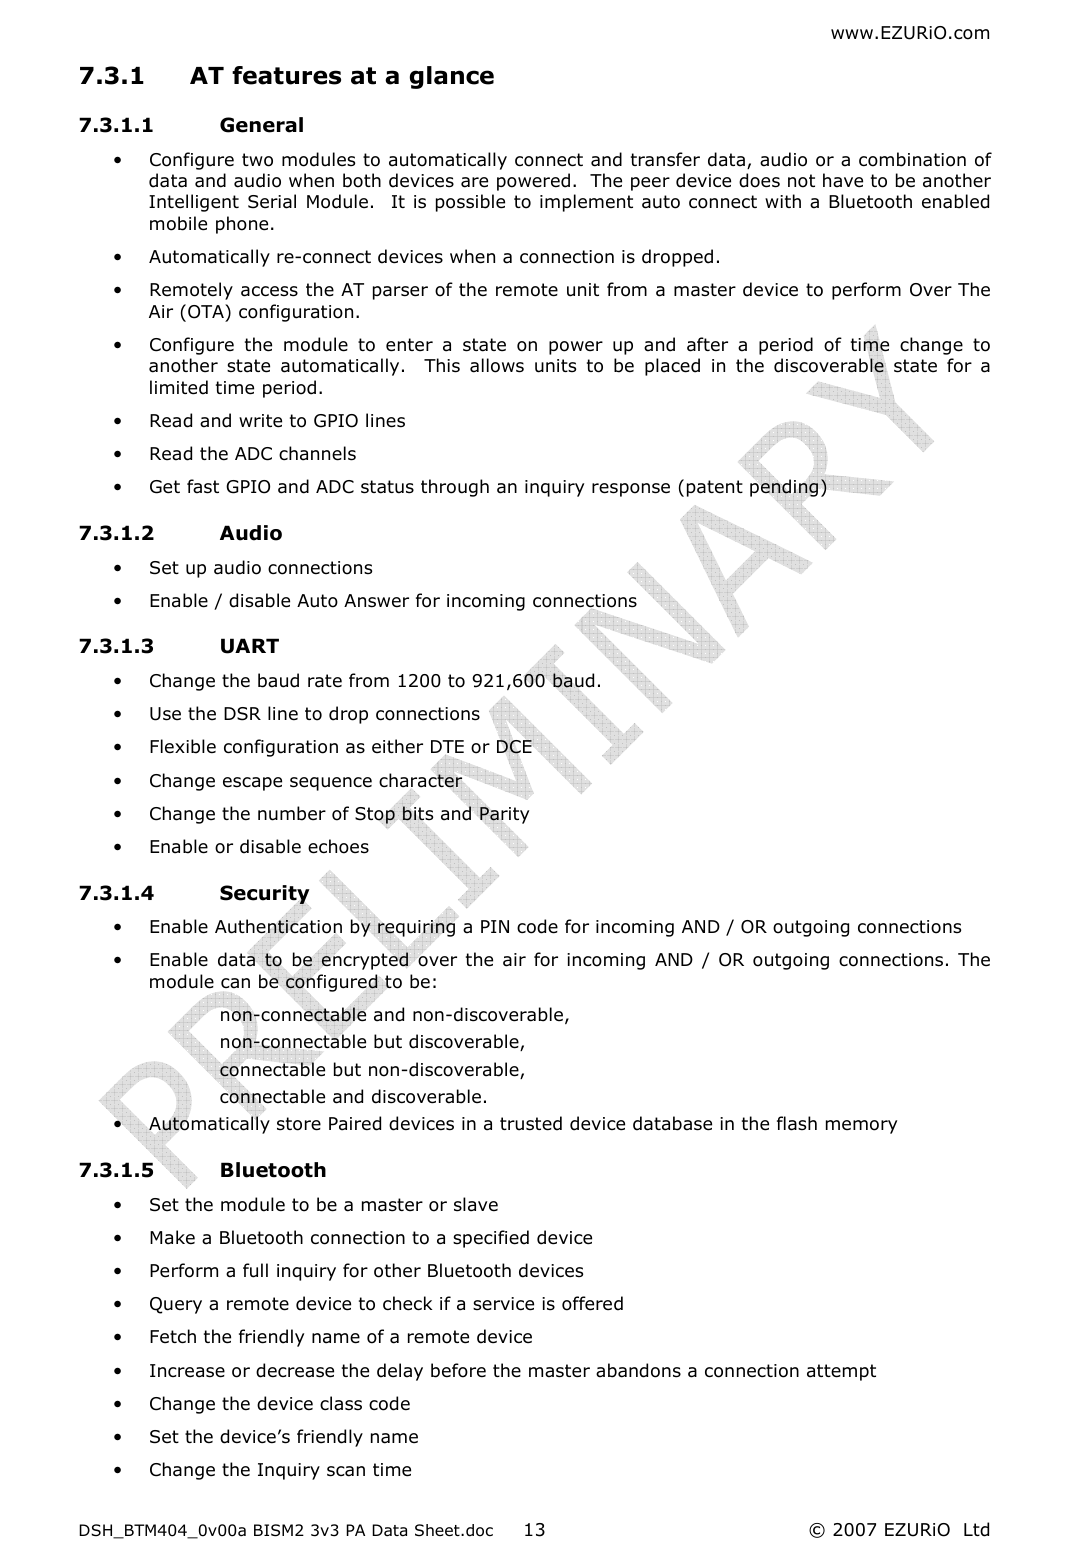 www.EZURiO.com DSH_BTM404_0v00a BISM2 3v3 PA Data Sheet.doc  © 2007 EZURiO  Ltd  137.3.1 AT features at a glance 7.3.1.1 General • Configure two modules to automatically connect and transfer data, audio or a combination of data and audio when both devices are powered.  The peer device does not have to be another Intelligent Serial Module.  It is possible to implement auto connect with a Bluetooth enabled mobile phone. • Automatically re-connect devices when a connection is dropped. • Remotely access the AT parser of the remote unit from a master device to perform Over The Air (OTA) configuration. • Configure  the  module  to  enter  a  state  on  power  up  and  after  a  period  of  time  change  to another  state  automatically.    This  allows  units  to  be  placed  in  the  discoverable  state  for  a limited time period. • Read and write to GPIO lines • Read the ADC channels • Get fast GPIO and ADC status through an inquiry response (patent pending) 7.3.1.2 Audio • Set up audio connections • Enable / disable Auto Answer for incoming connections 7.3.1.3 UART • Change the baud rate from 1200 to 921,600 baud. • Use the DSR line to drop connections • Flexible configuration as either DTE or DCE • Change escape sequence character • Change the number of Stop bits and Parity • Enable or disable echoes 7.3.1.4 Security • Enable Authentication by requiring a PIN code for incoming AND / OR outgoing connections • Enable data  to  be  encrypted  over  the  air  for incoming AND / OR outgoing connections. The module can be configured to be: non-connectable and non-discoverable, non-connectable but discoverable,  connectable but non-discoverable, connectable and discoverable. • Automatically store Paired devices in a trusted device database in the flash memory 7.3.1.5 Bluetooth • Set the module to be a master or slave • Make a Bluetooth connection to a specified device • Perform a full inquiry for other Bluetooth devices • Query a remote device to check if a service is offered • Fetch the friendly name of a remote device • Increase or decrease the delay before the master abandons a connection attempt • Change the device class code • Set the device’s friendly name • Change the Inquiry scan time 